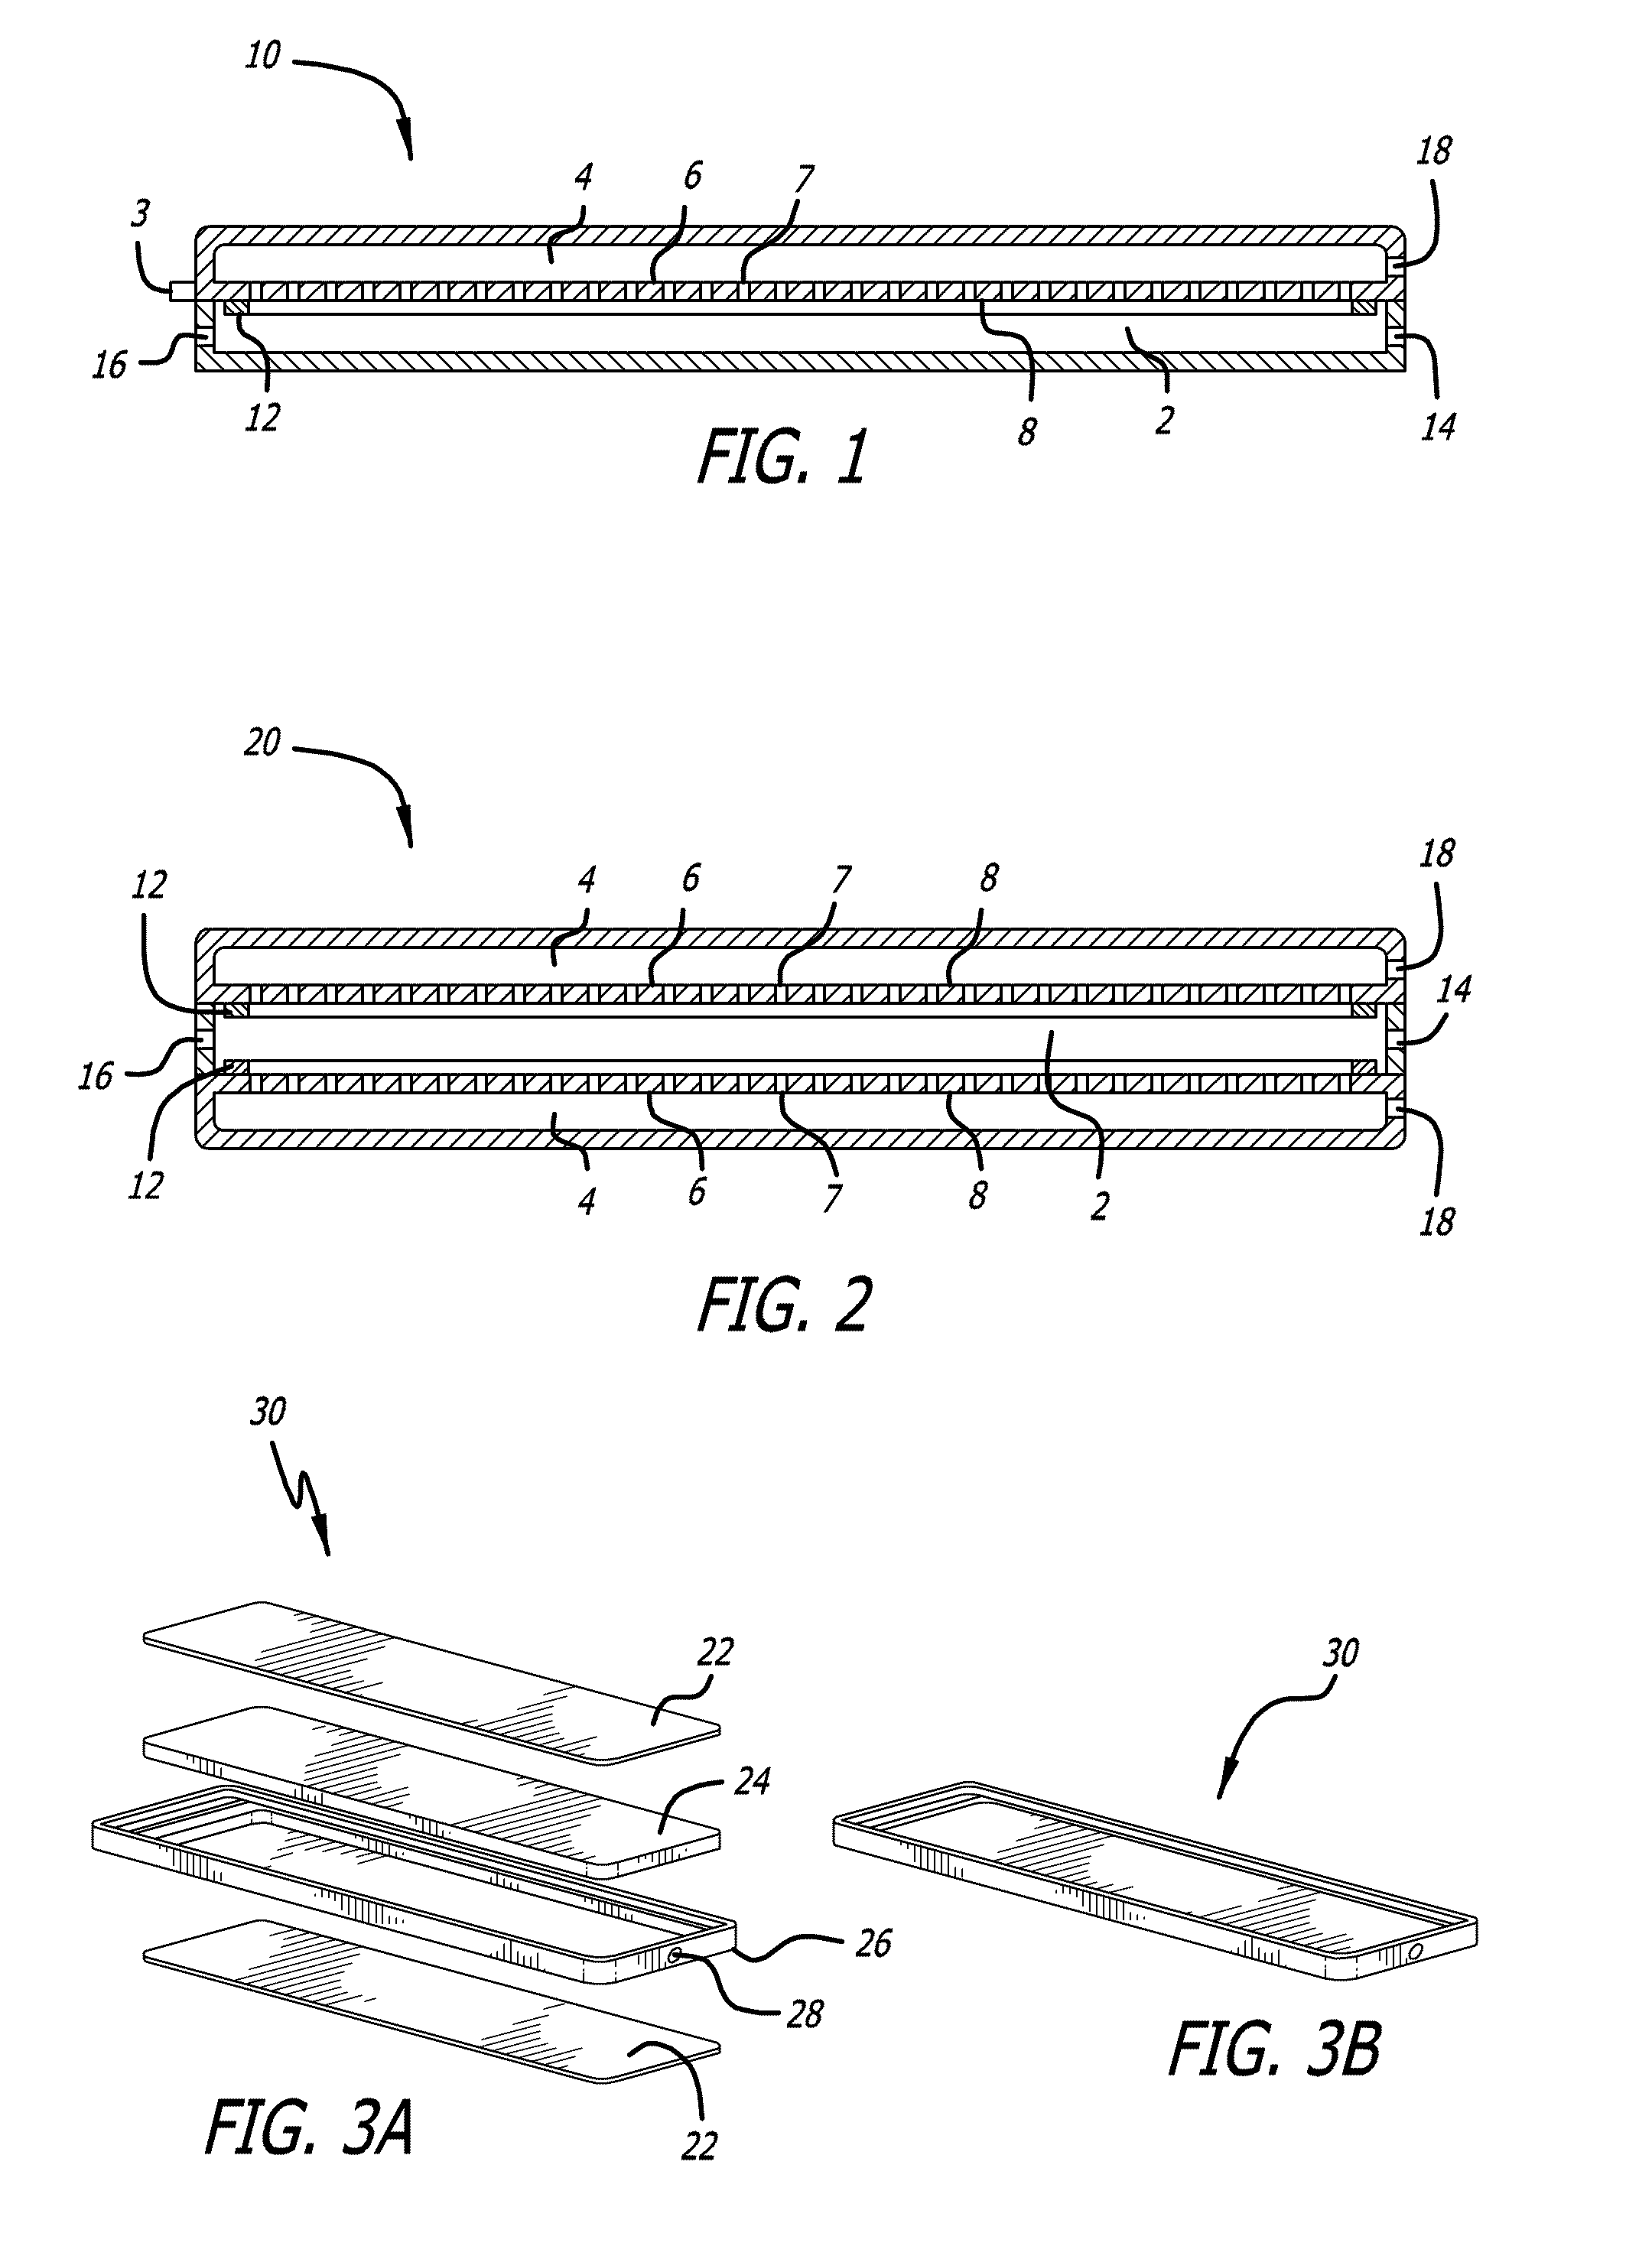 Array of planar membrane modules for producing hydrogen